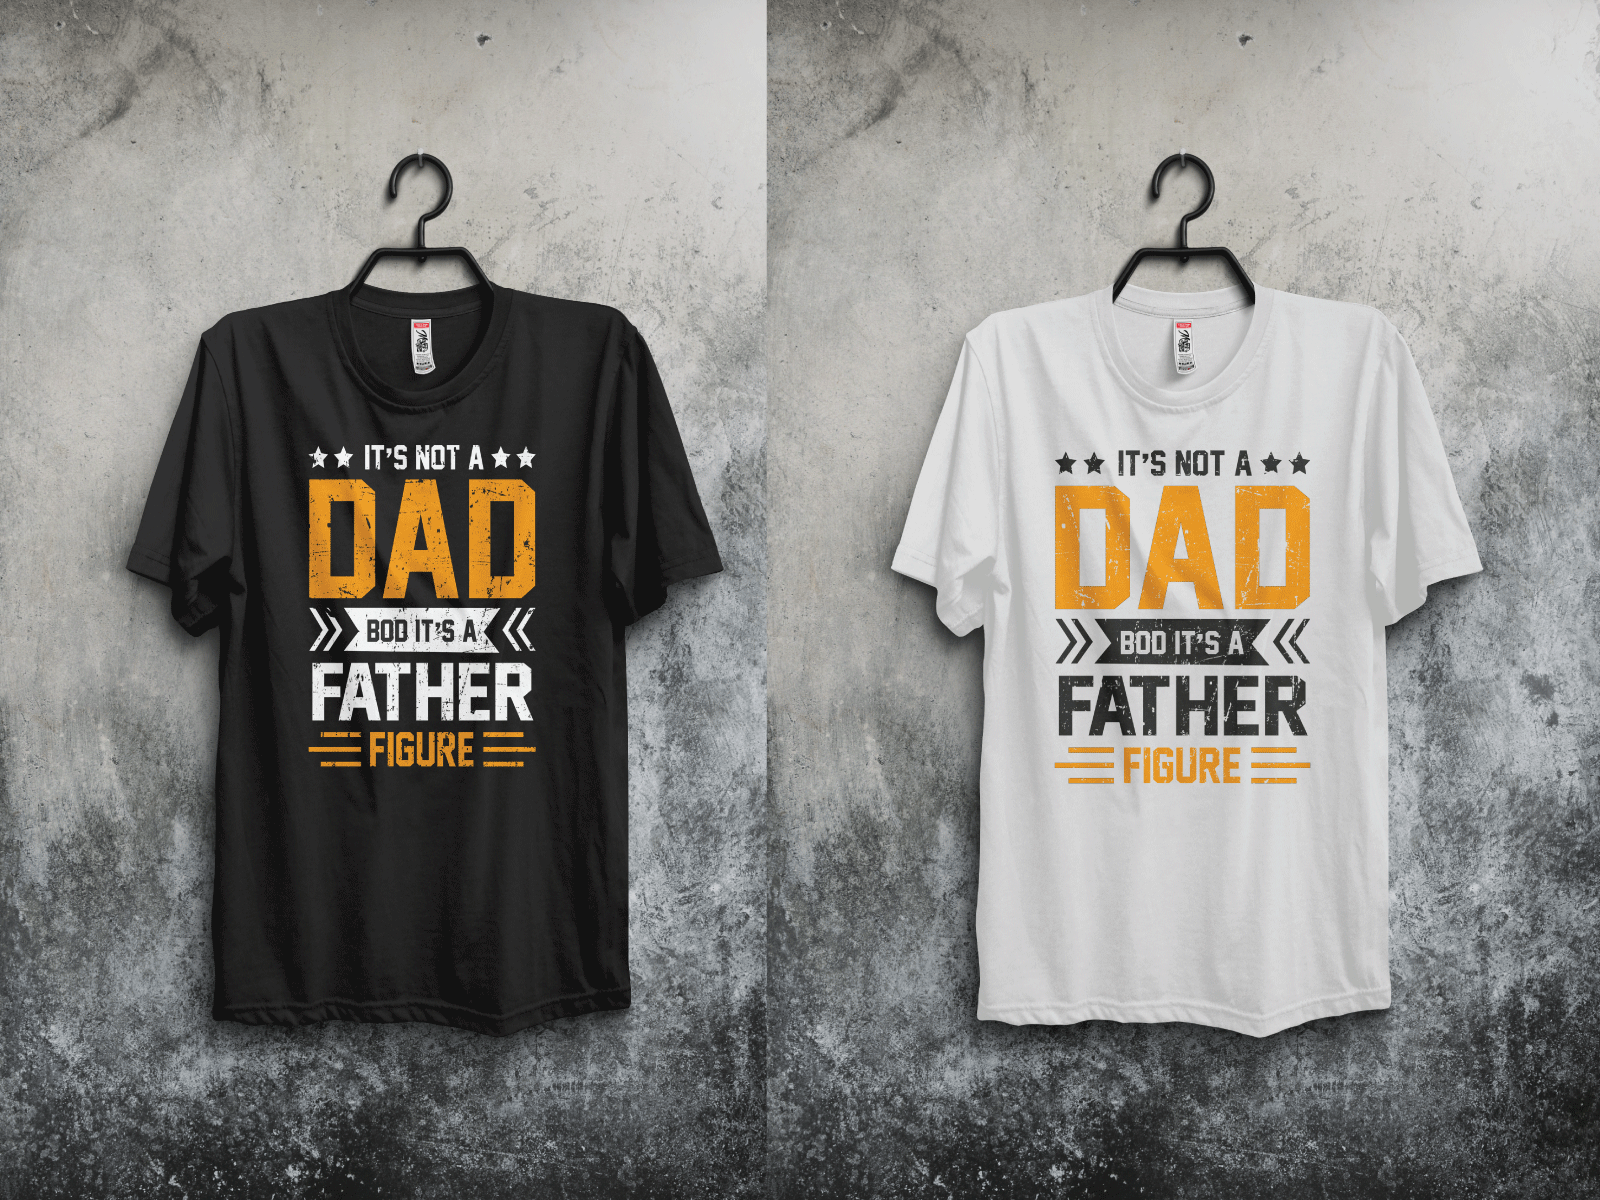 Father t-shirt design dad design father father t shirt design t shirt t shirt design